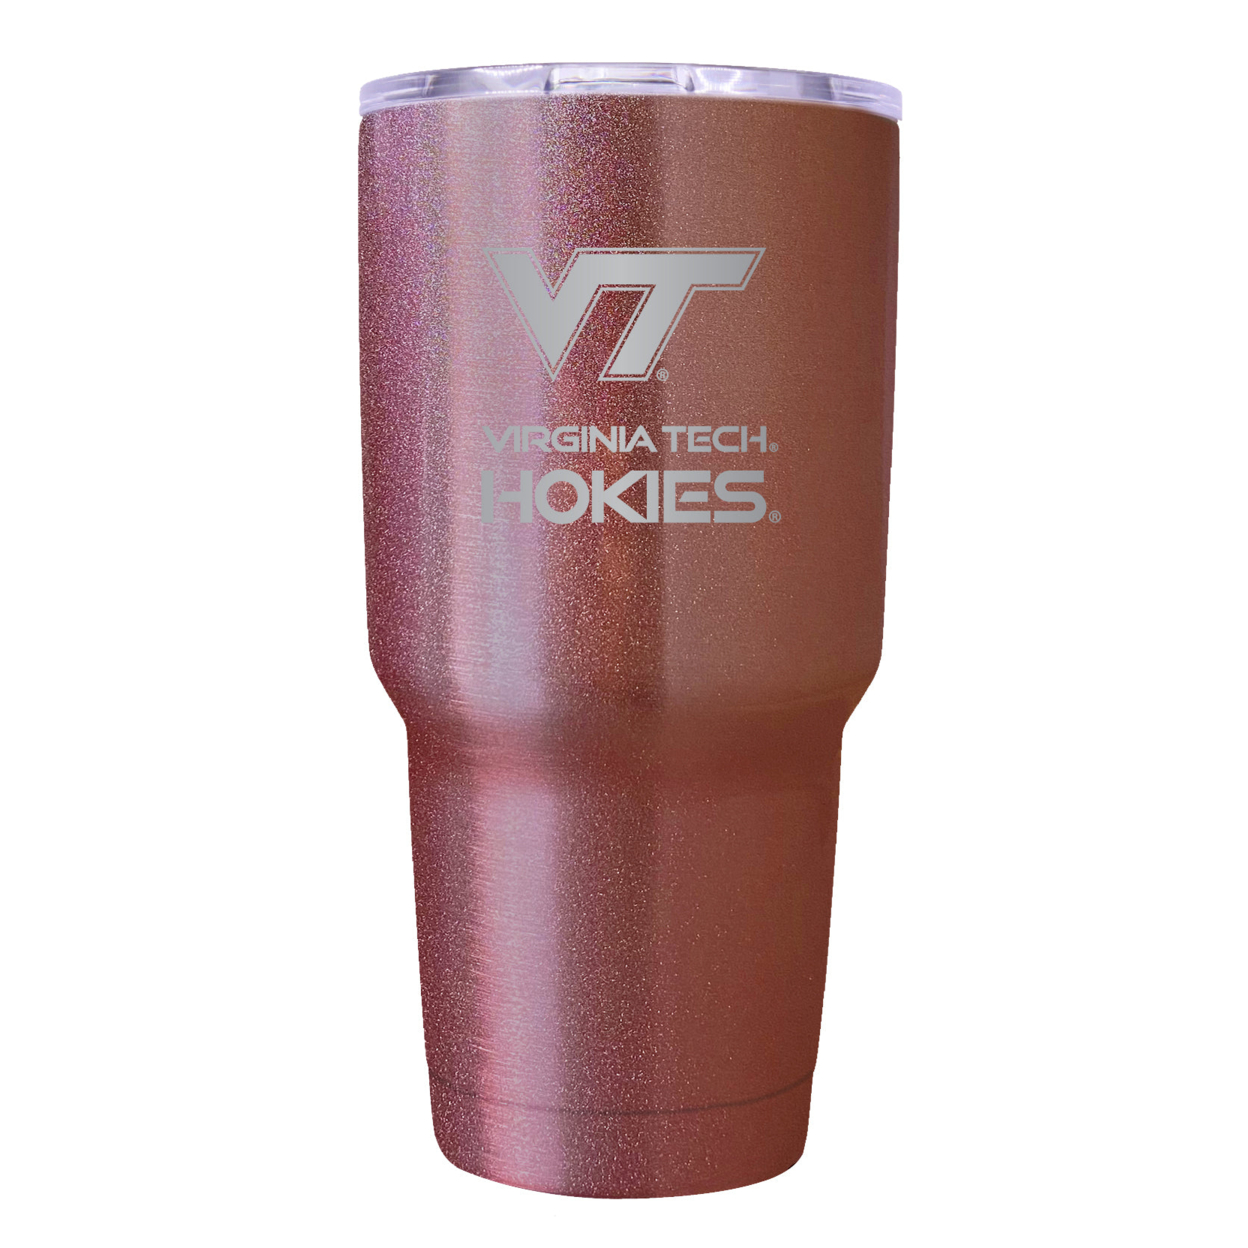 Virginia Tech Hokies 24 Oz Insulated Tumbler Etched - Rose Gold